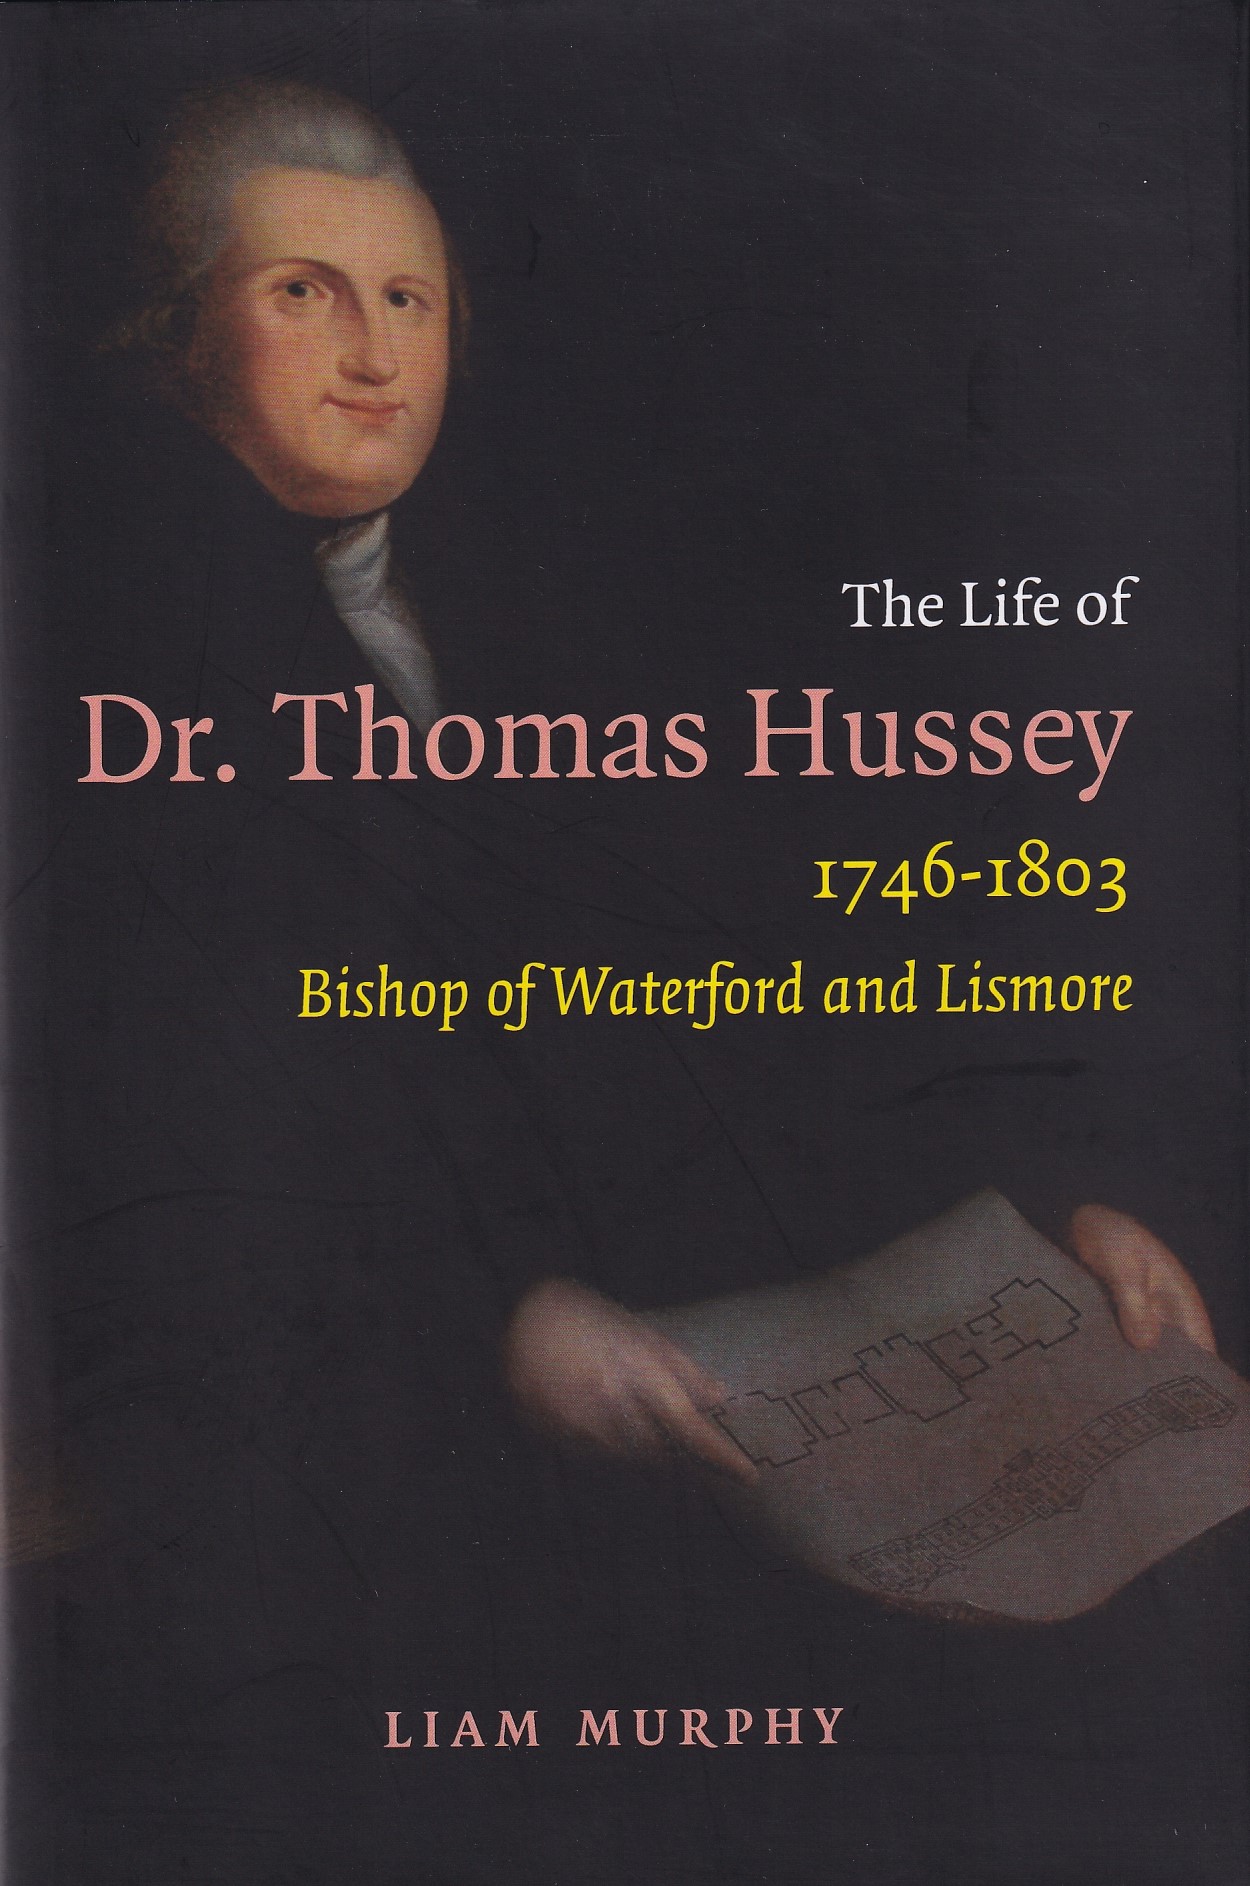 The Life of Dr. Thomas Hussey, 1746-1803: Bishop of Waterford and Lismore | Liam Murphy | Charlie Byrne's